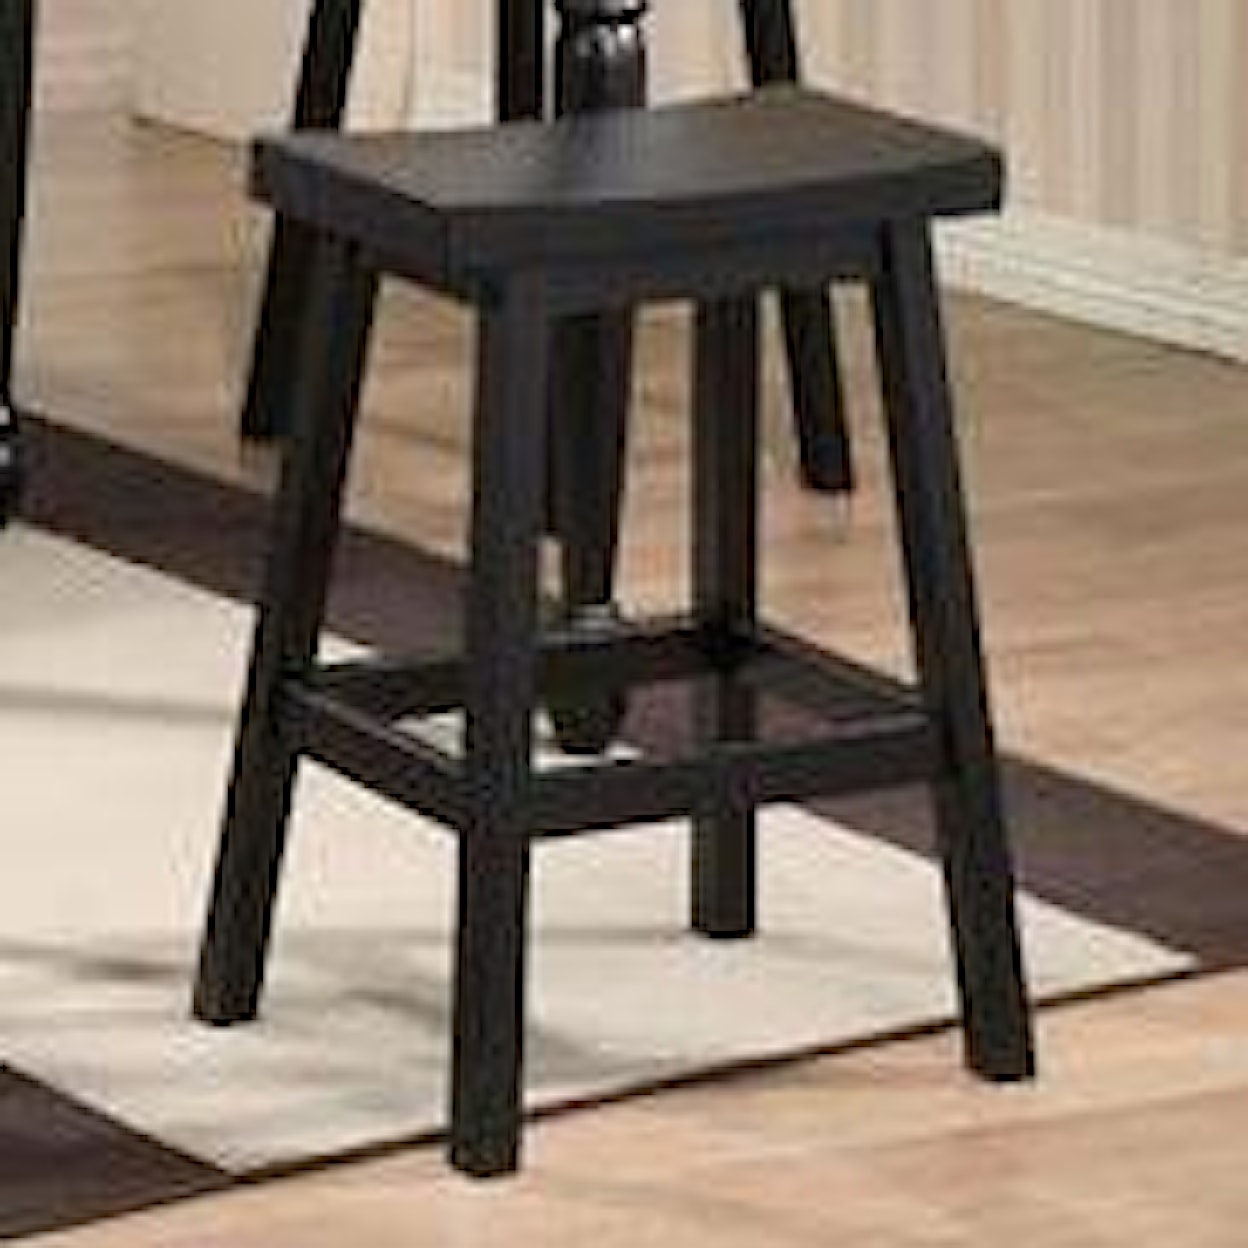 Winners Only Quails Run 5 Piece Tall Table and Barstool Set